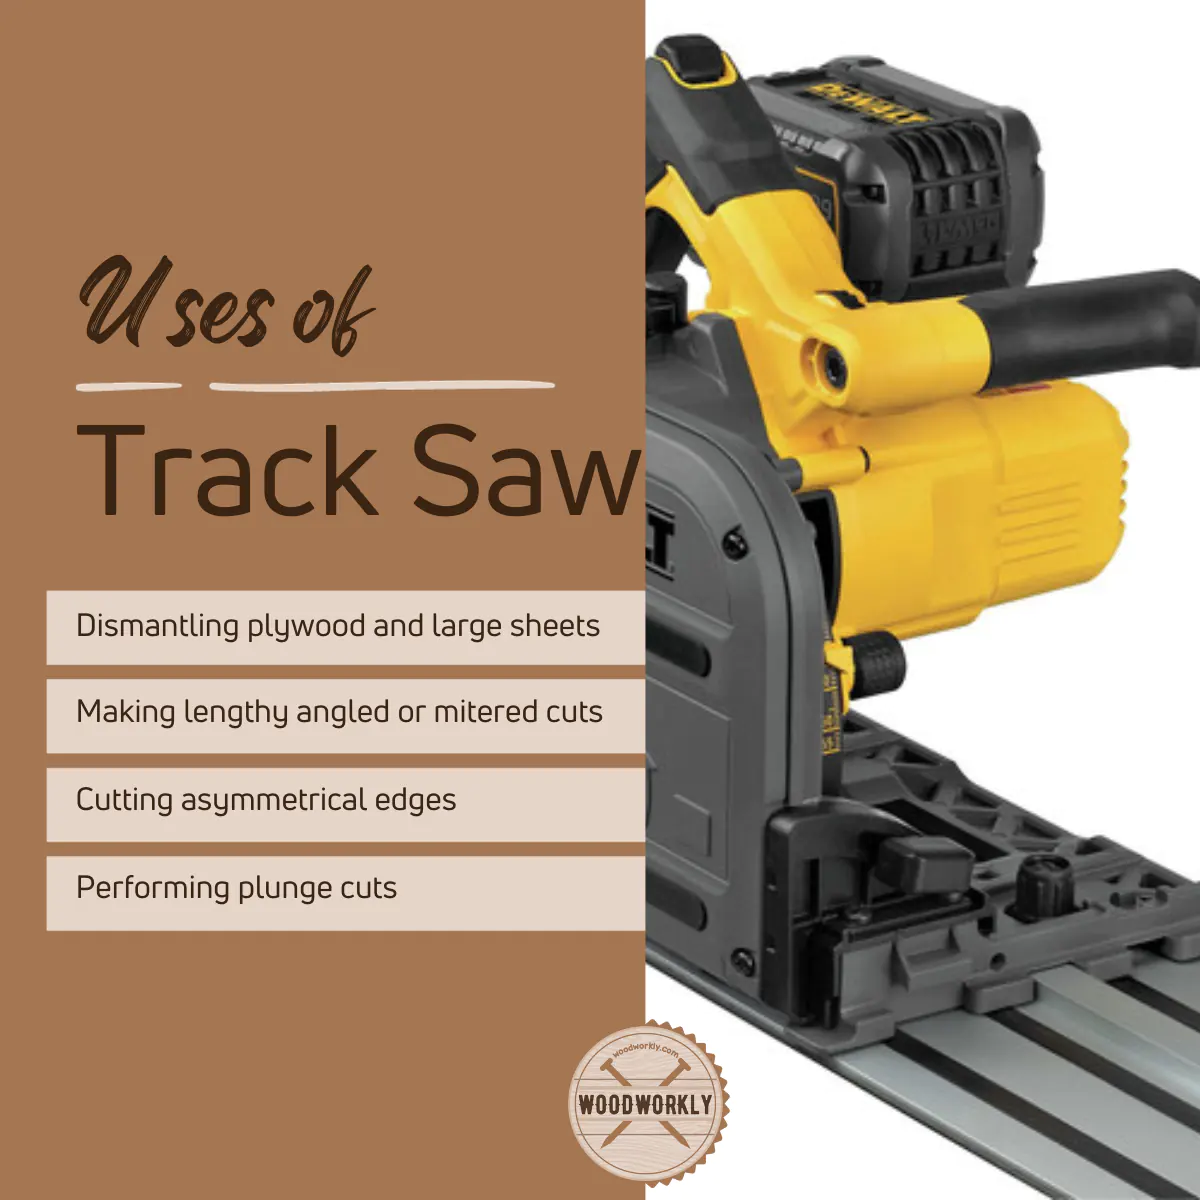 Uses of Track Saw